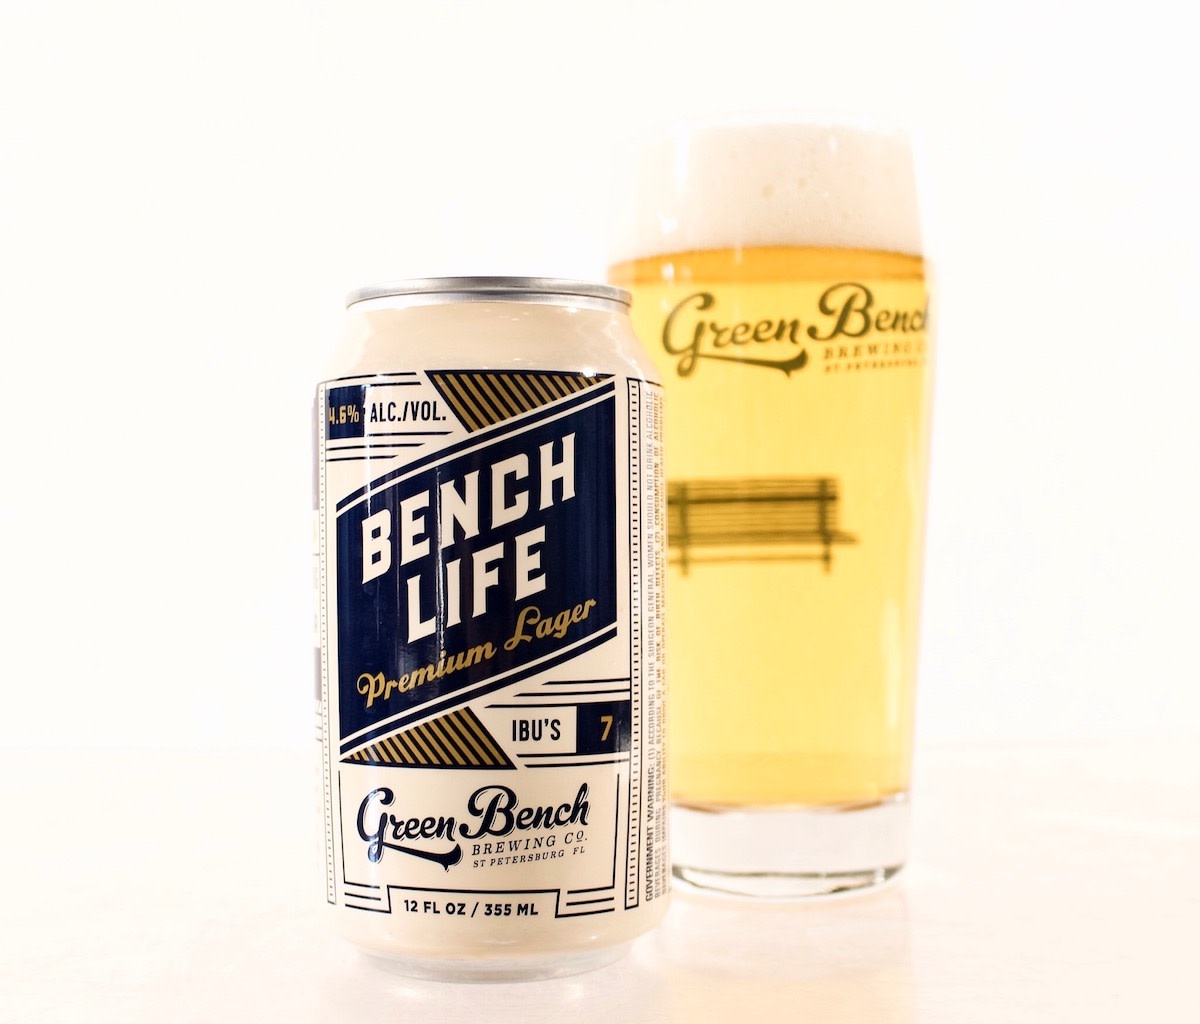 Bench Life Beer